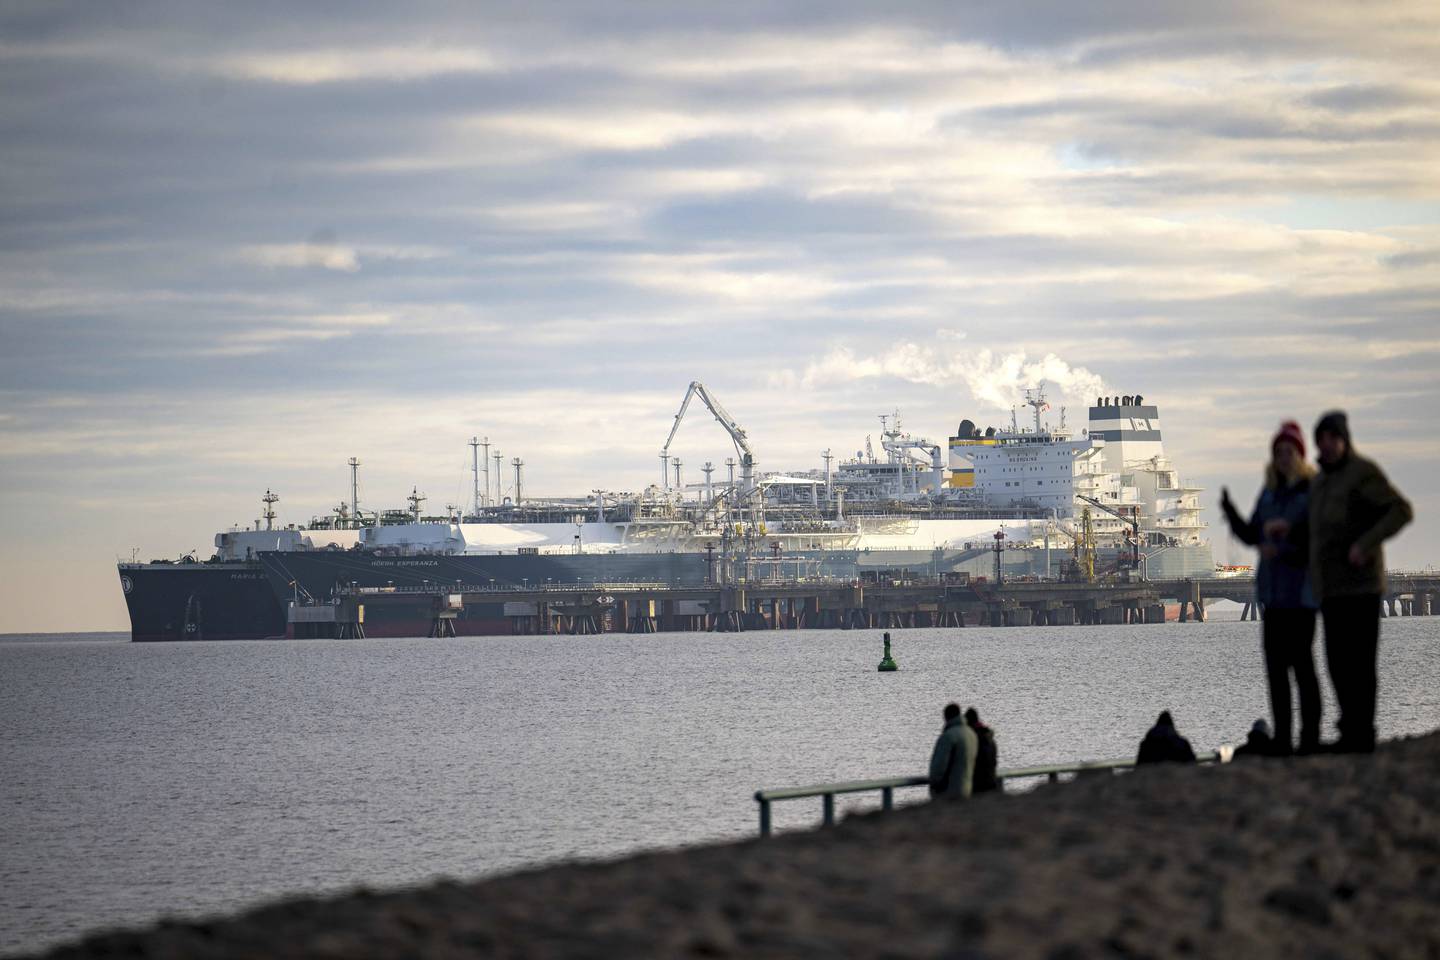 OPINION: Have no fear of imported LNG. It's Alaska's future. - Anchorage Daily News